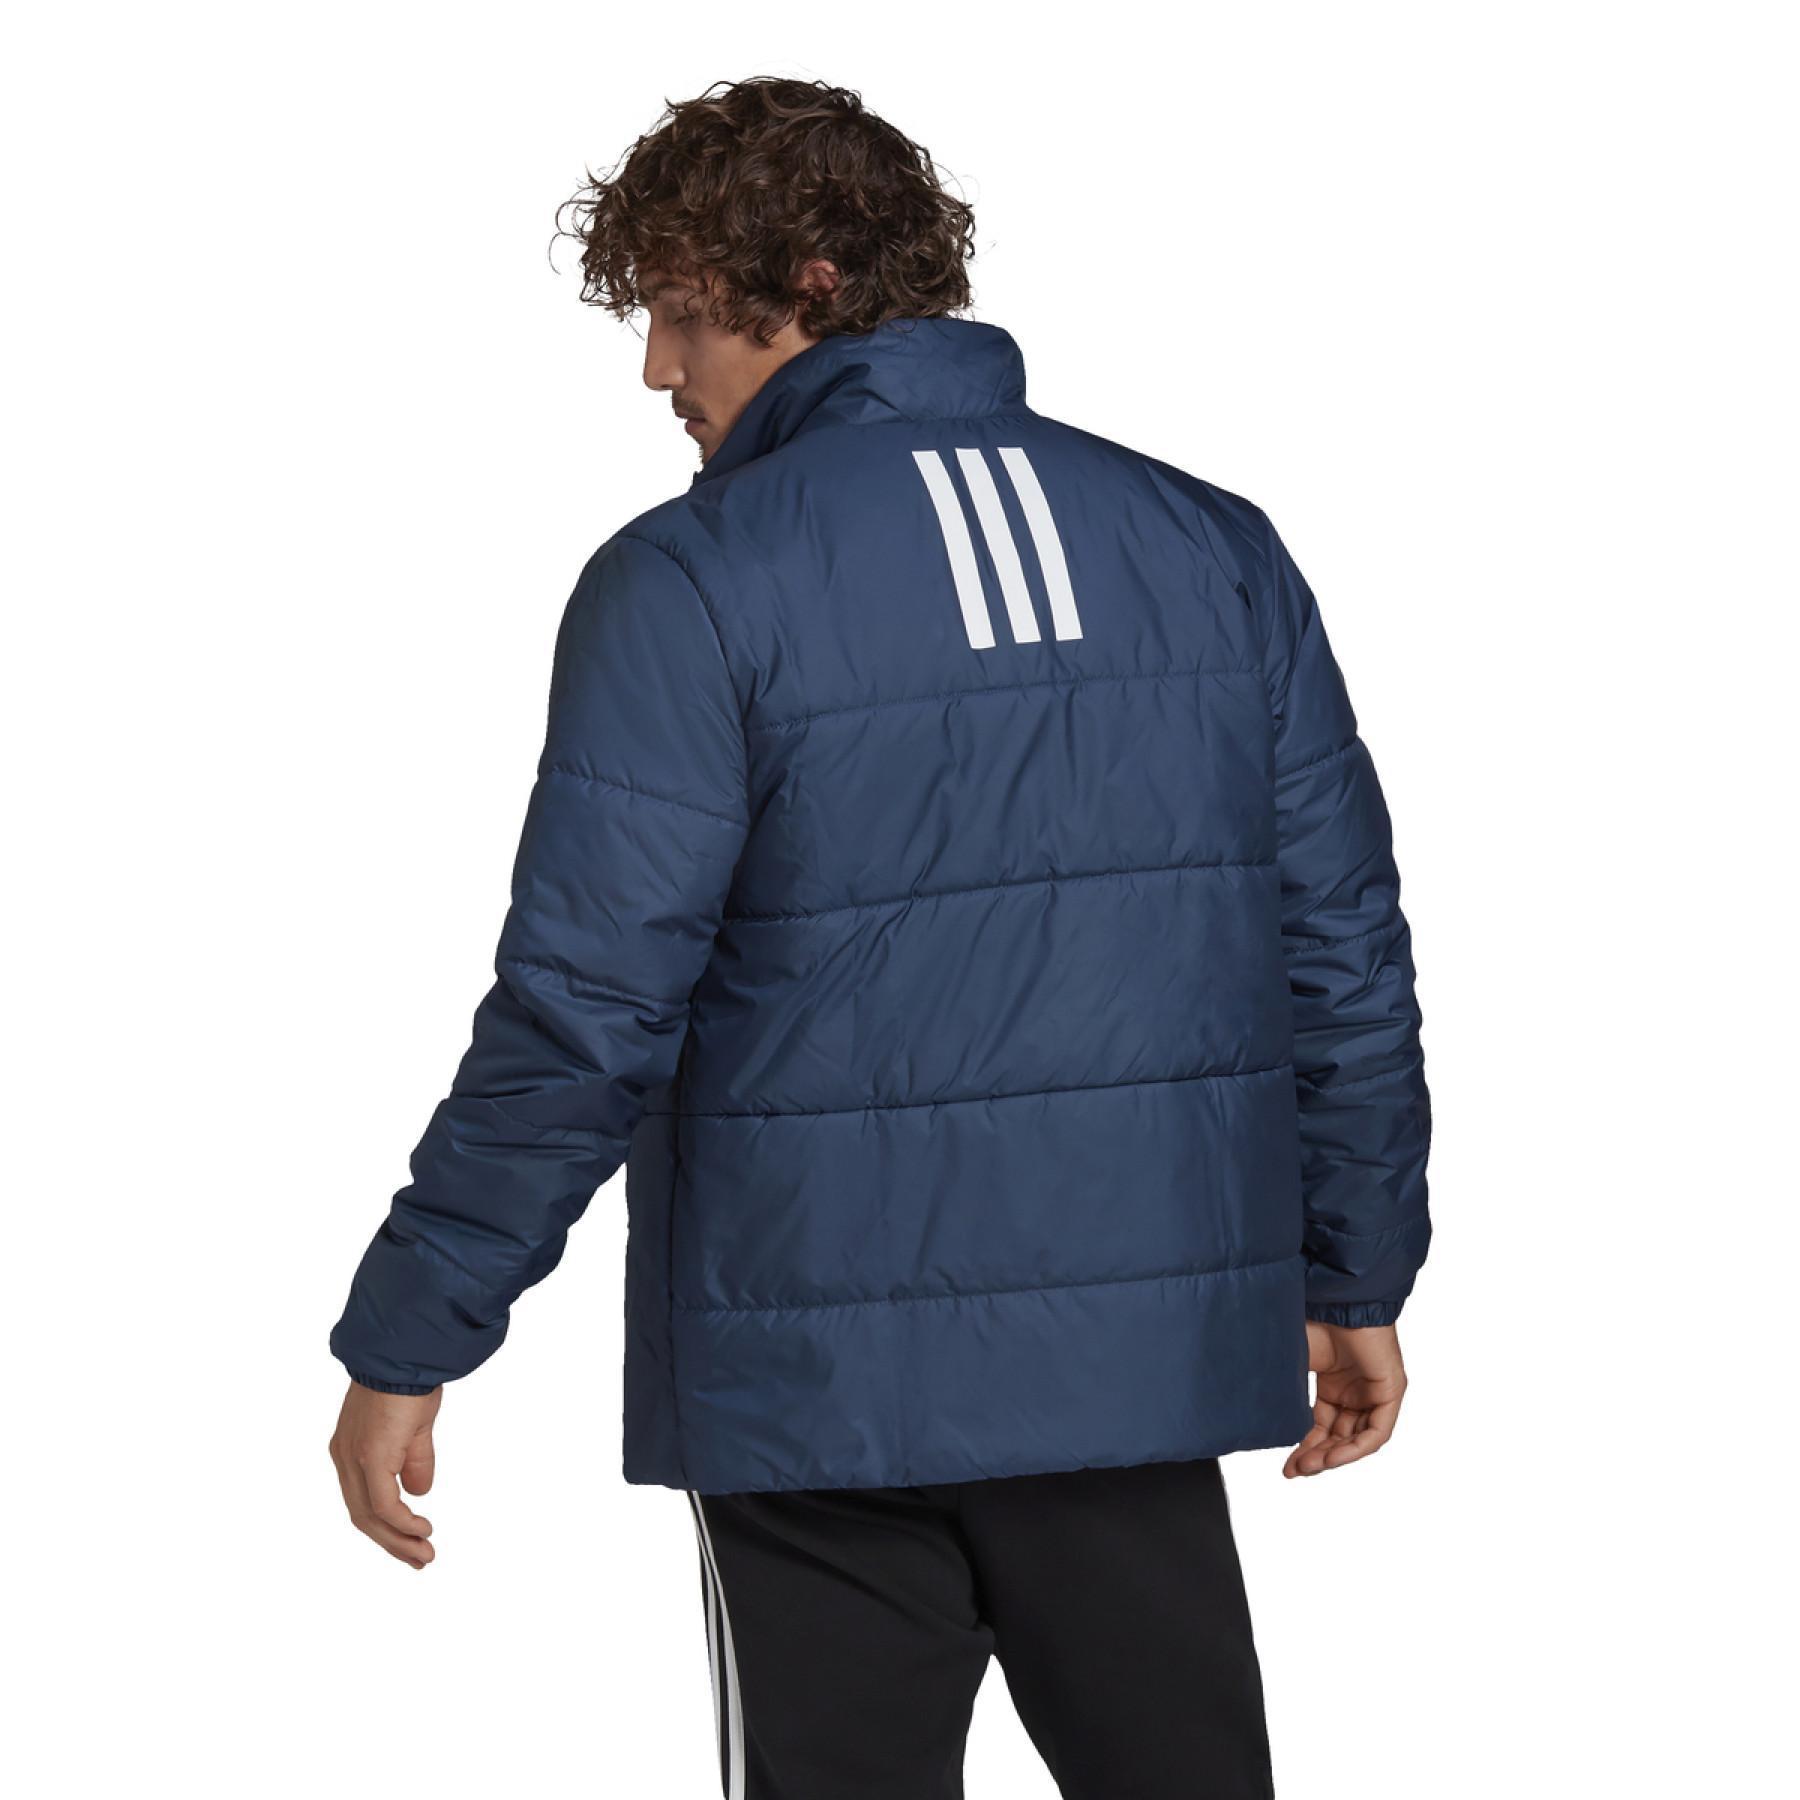 Jacka adidas BSC 3-Bandes Insulated Winter